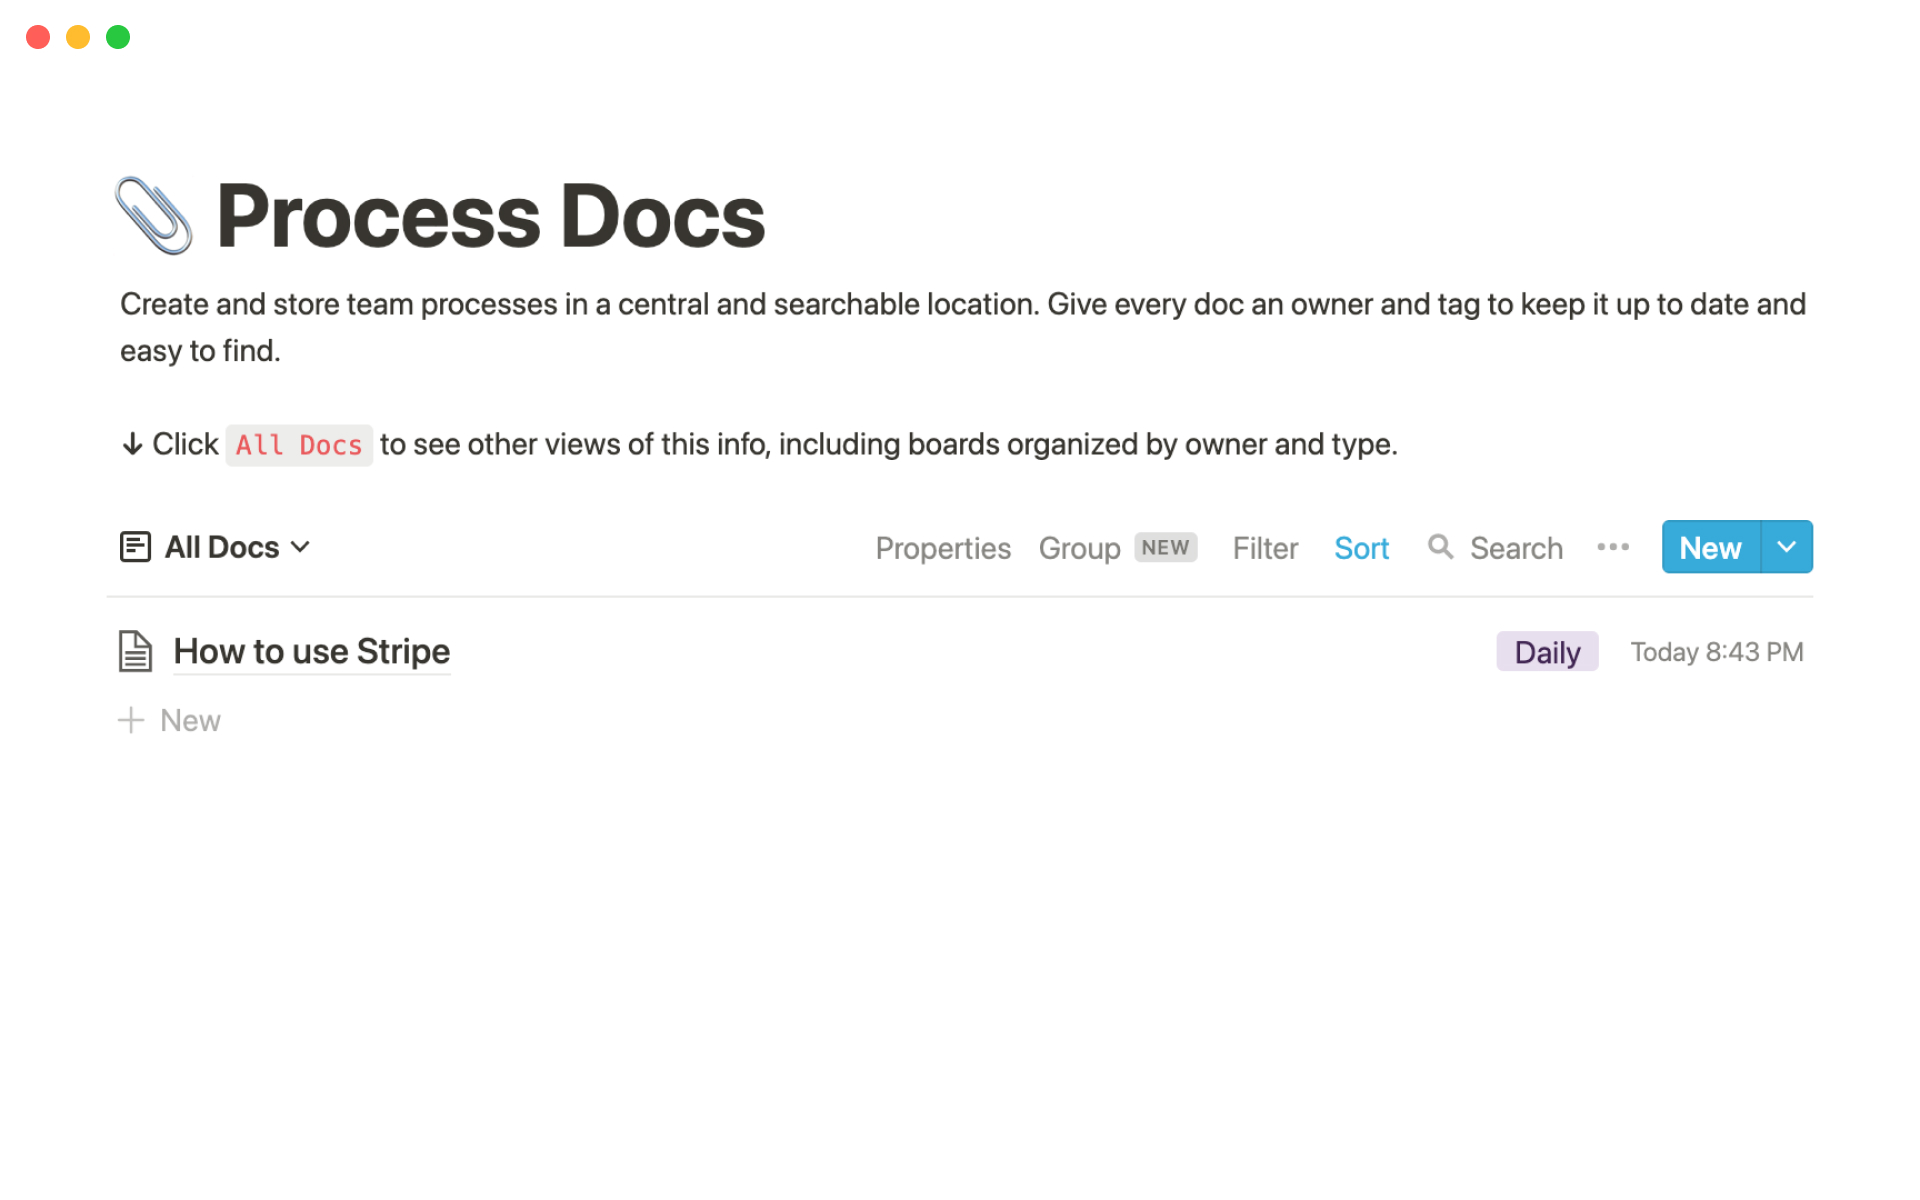 Create and store team processes in a central and searchable location.